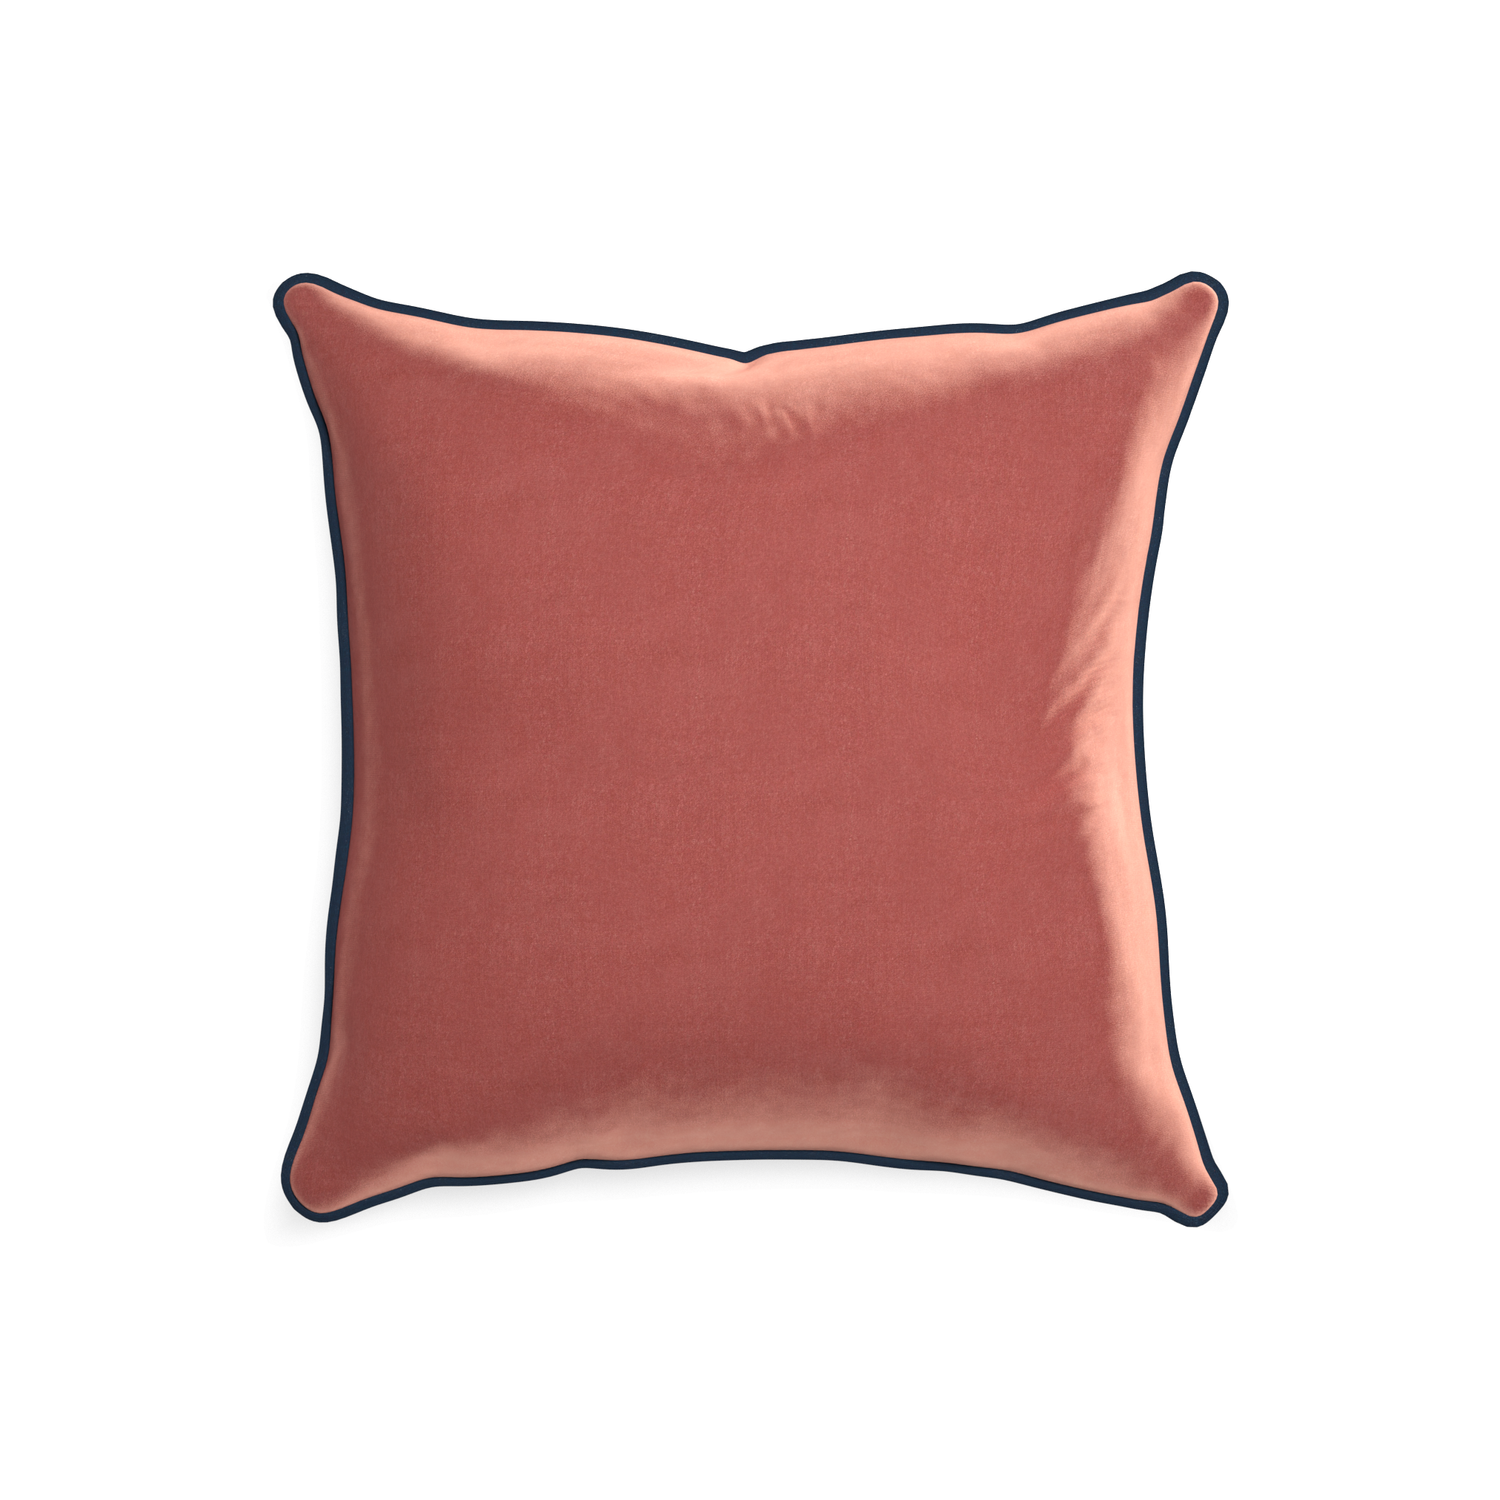 20-square cosmo velvet custom coralpillow with c piping on white background